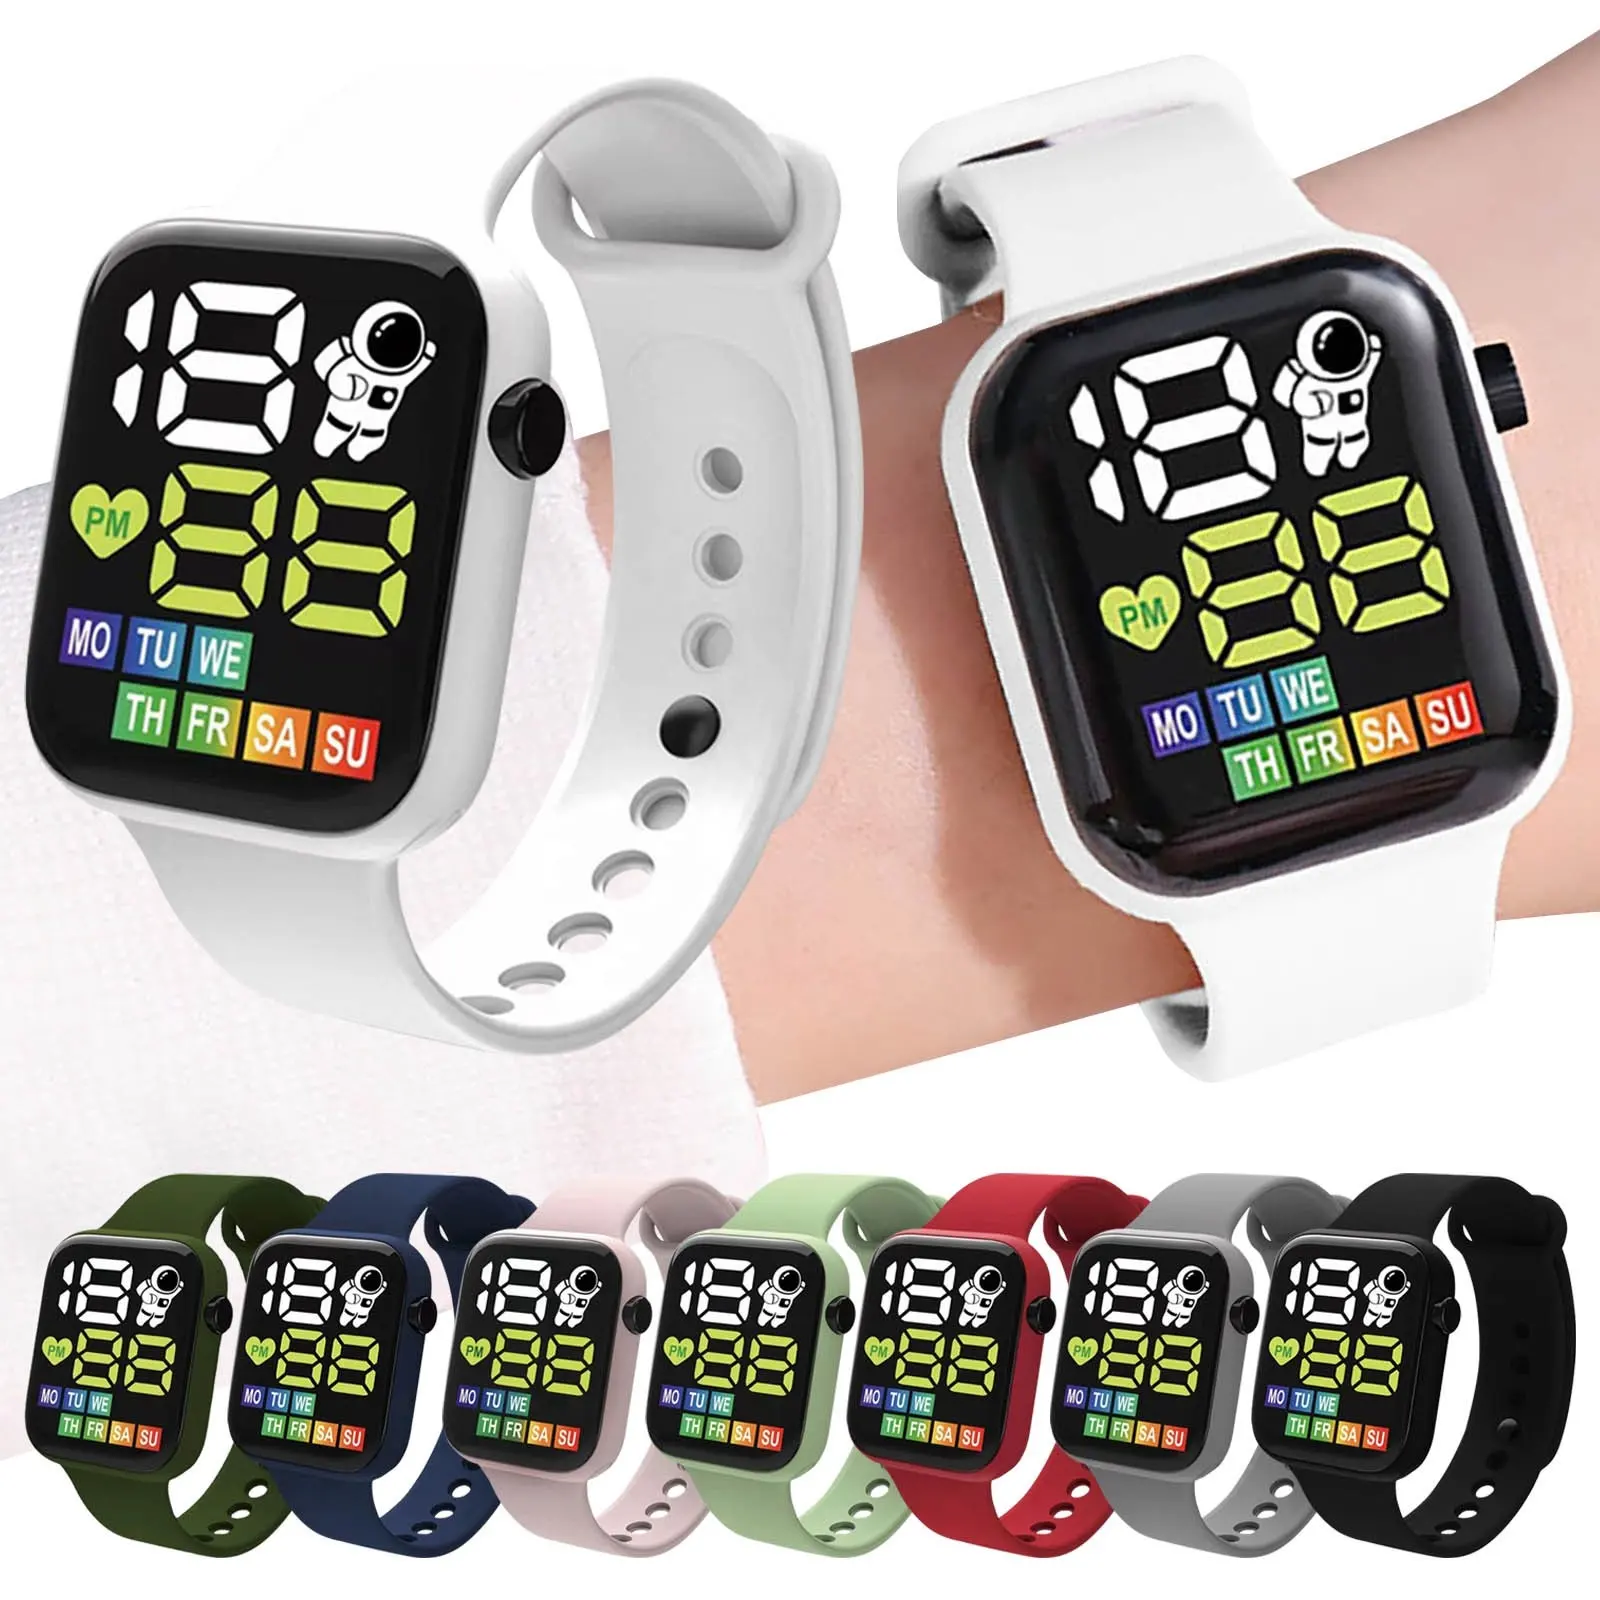 New arrival Y6 Cheap plastic LED Sports Watch Student Wristwatch Low cost Fashion Electronic Digital Watch